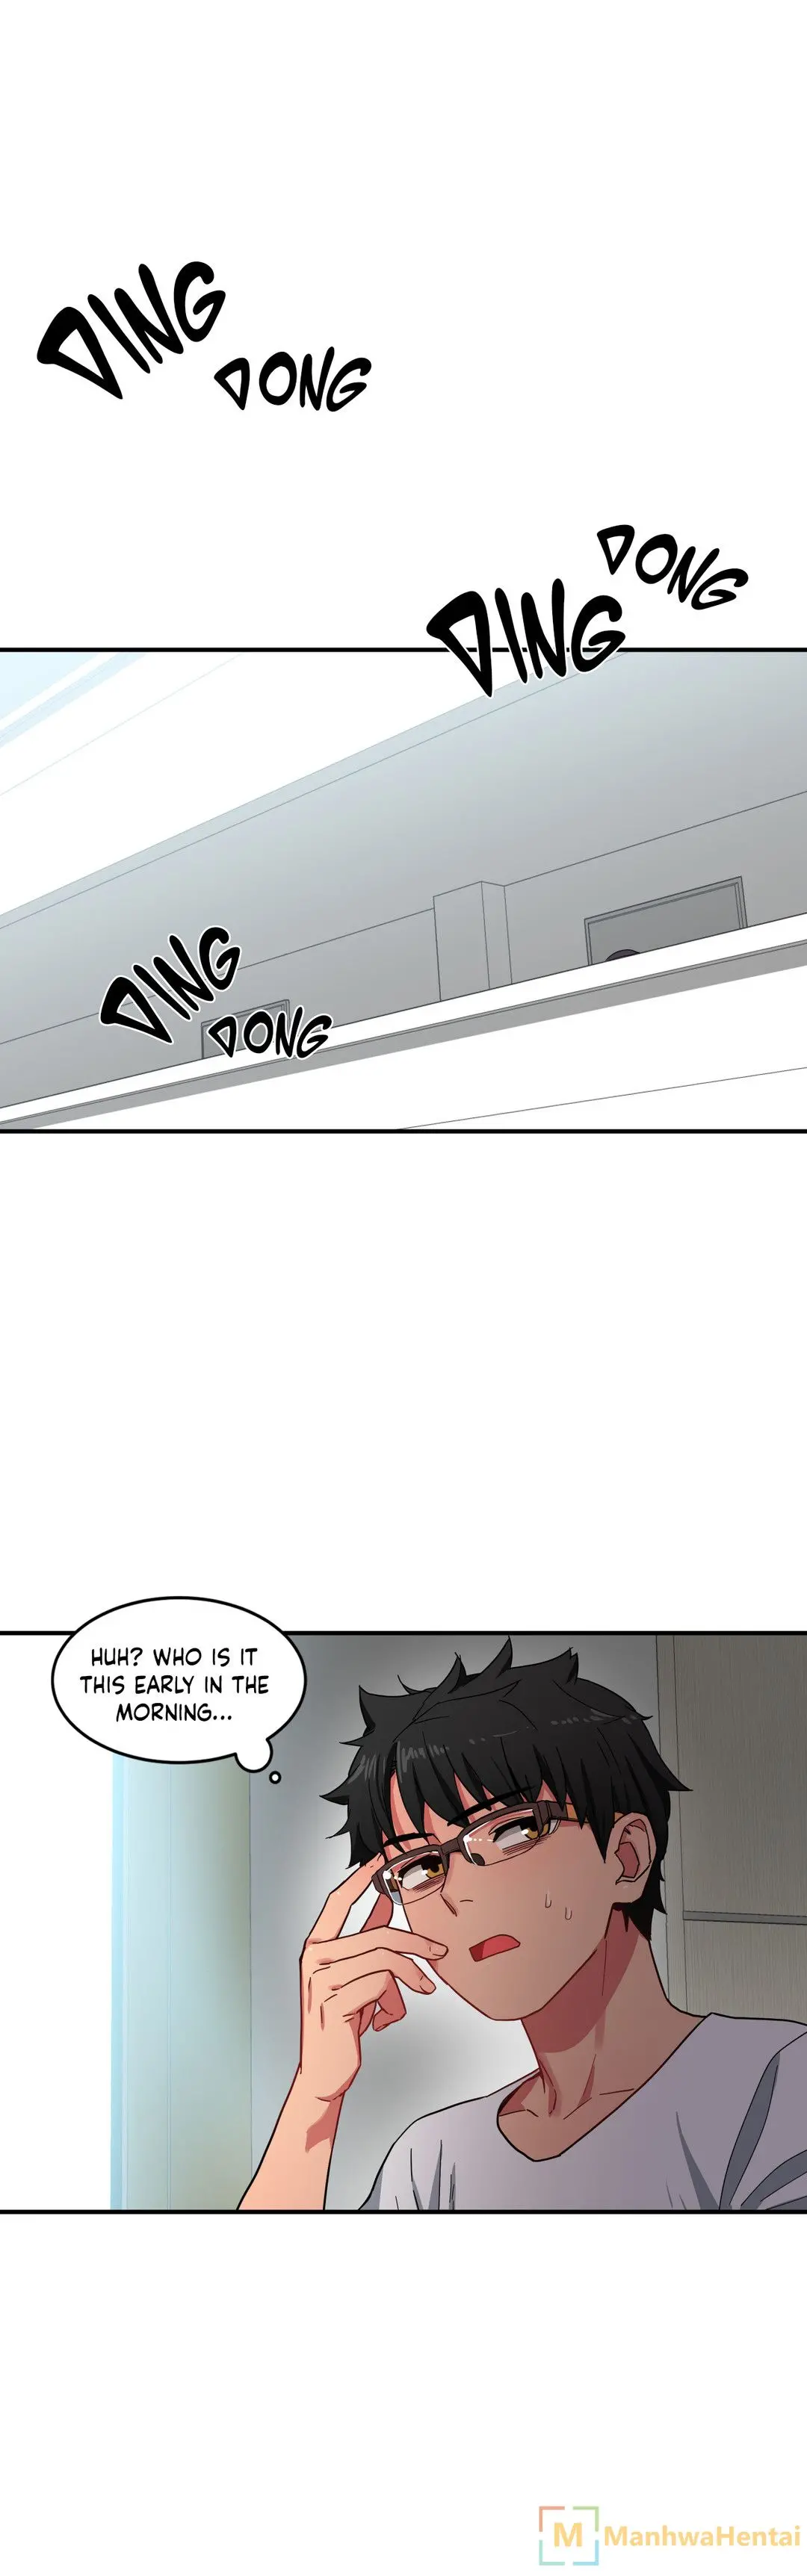 Solmi’s Channel - Chapter 8 Page 1